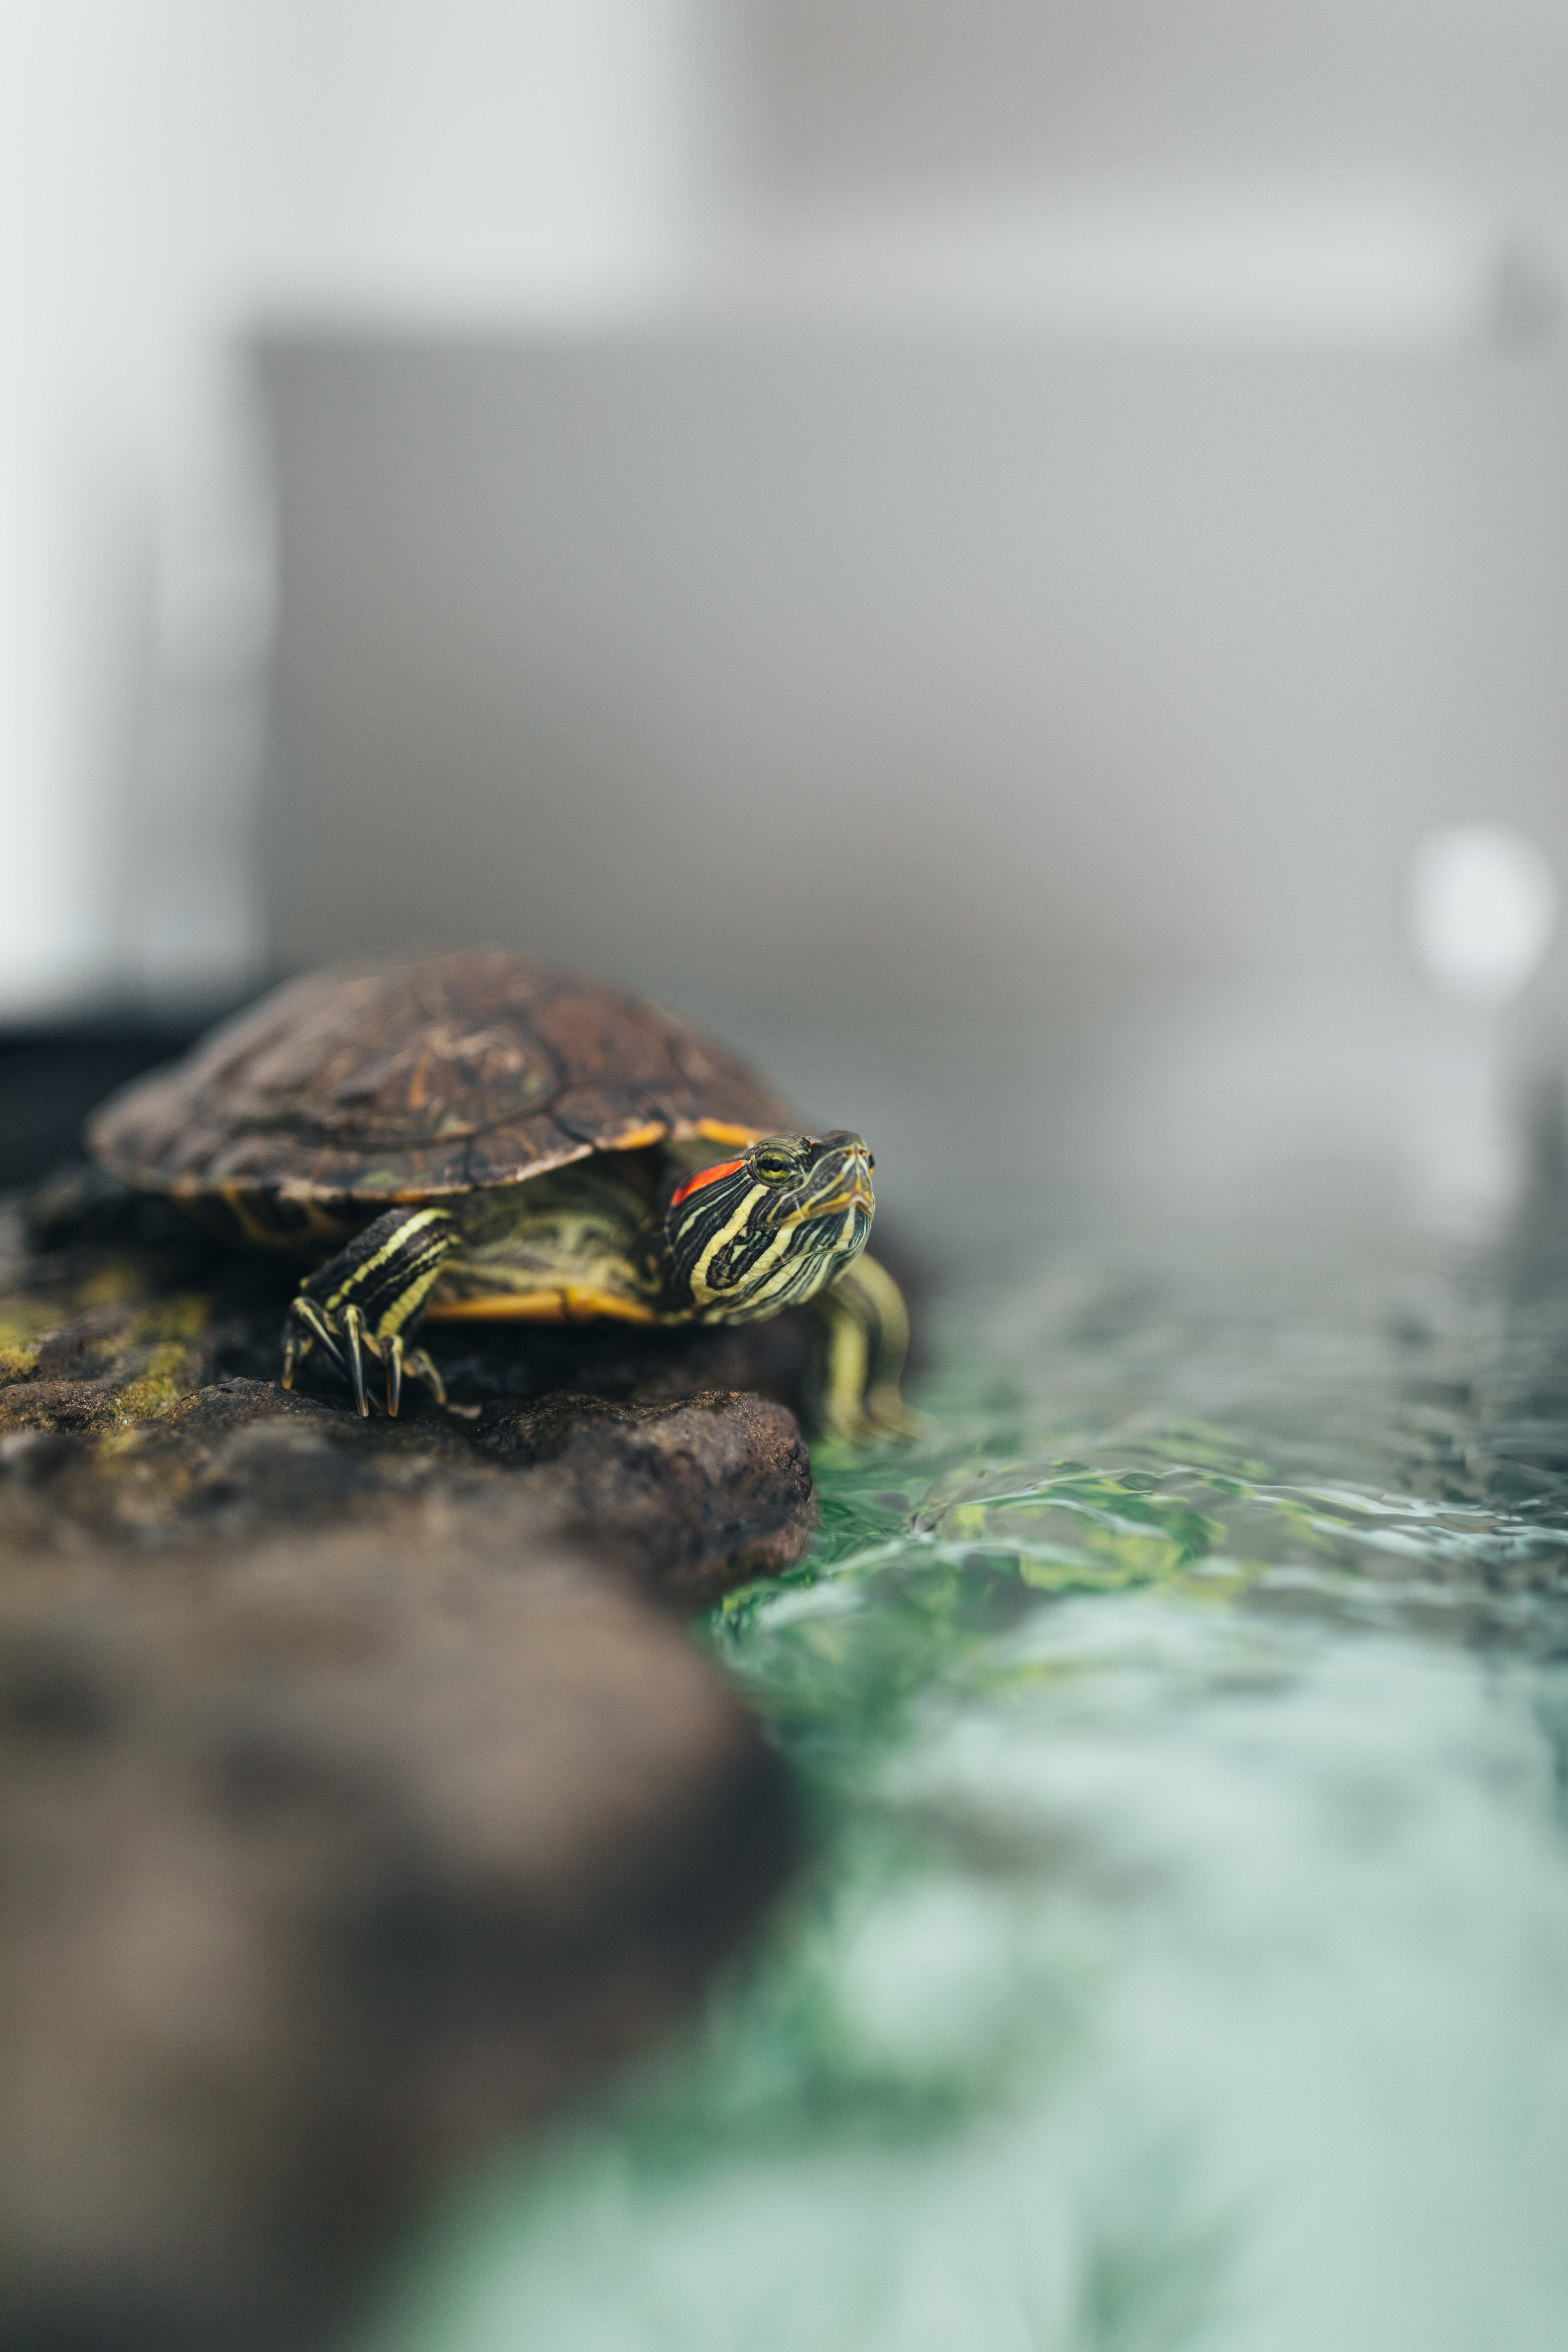 Free HD animals, water, animal, carapace, shell, turtle